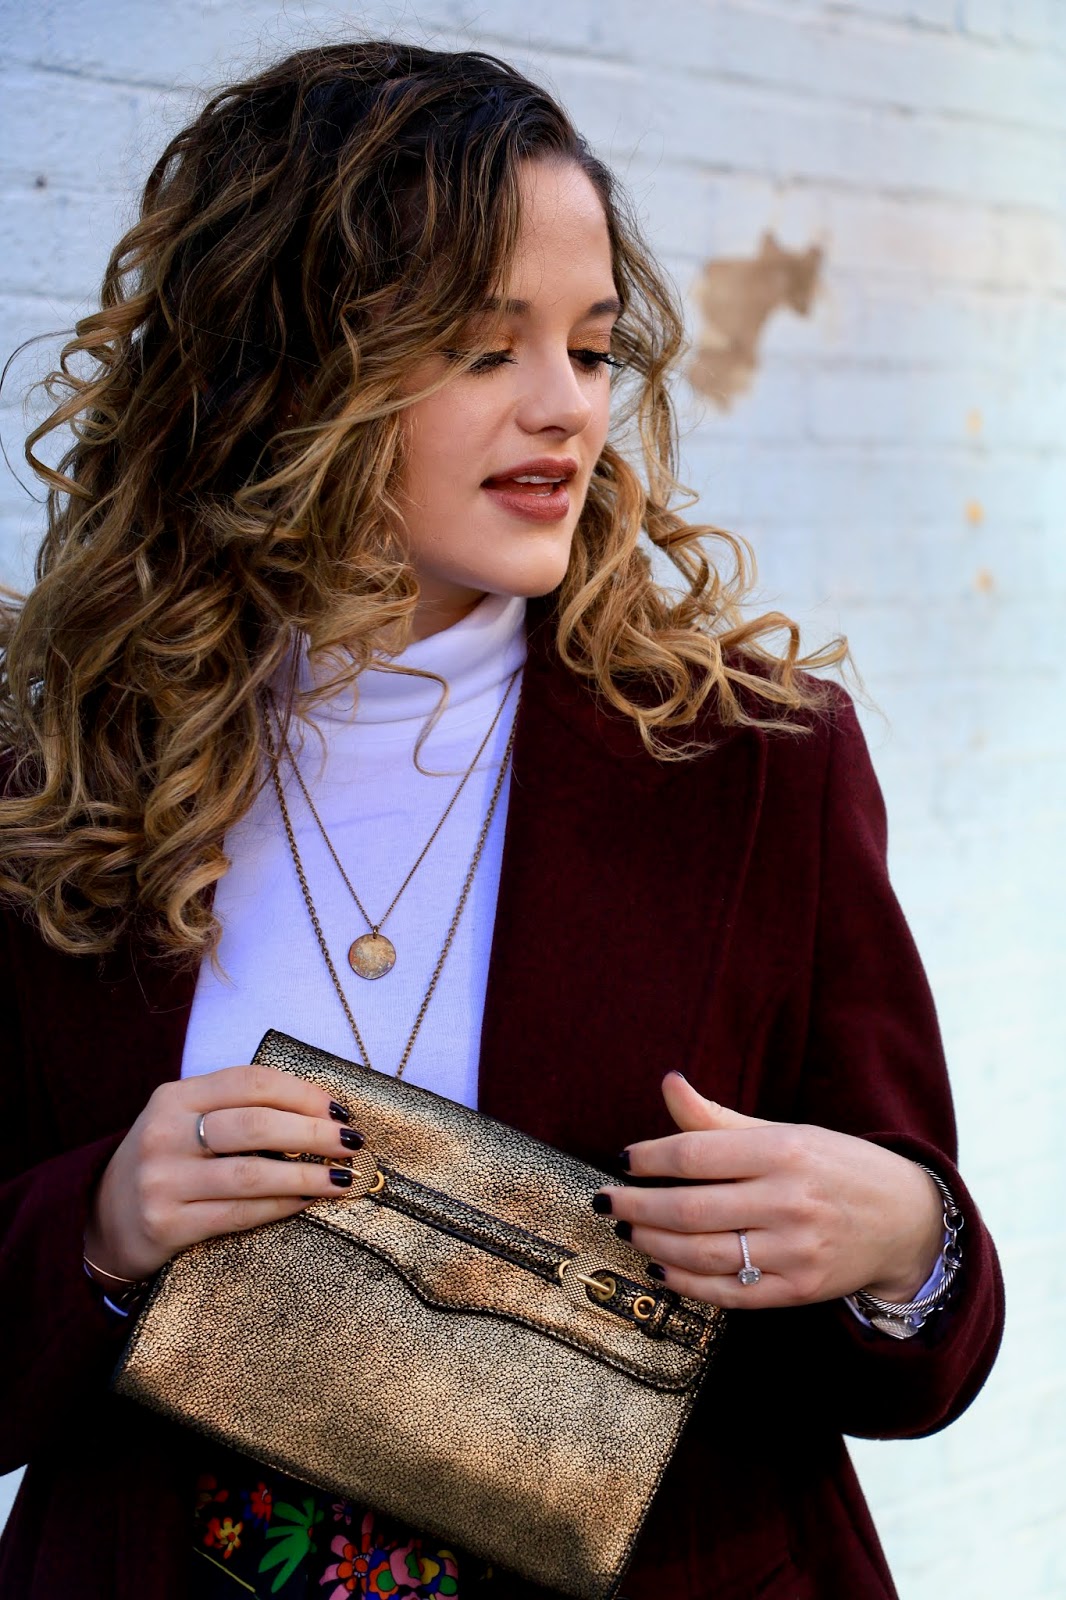 Nyc fashion blogger Kathleen Harper carrying a gold Rebecca Minkoff purse.